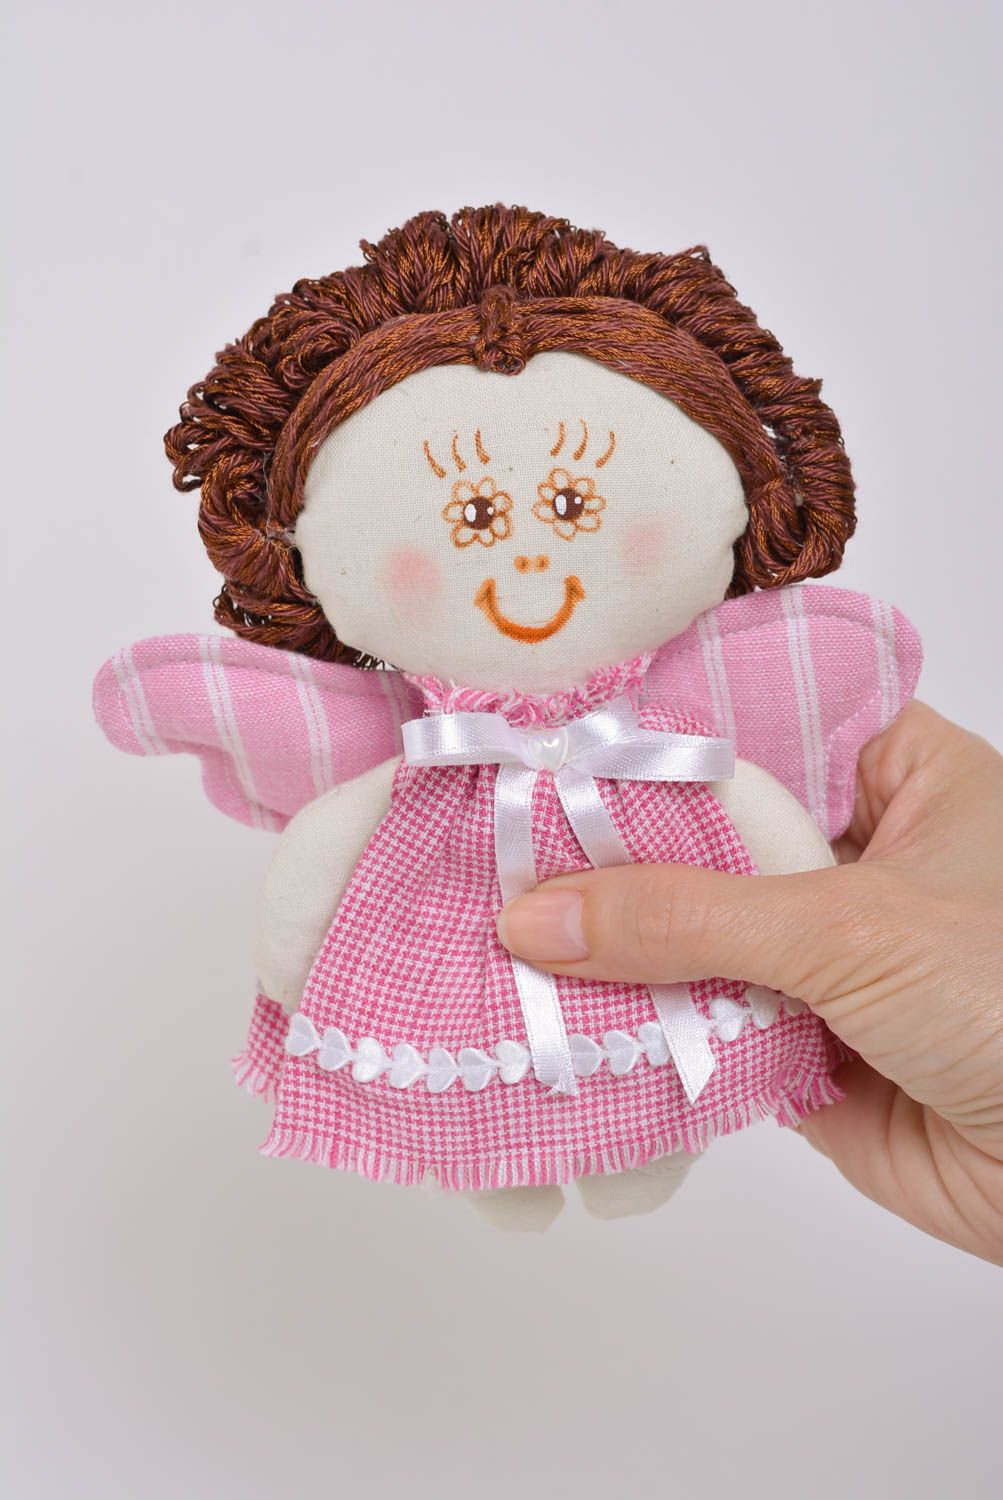 Handmade soft toy sewn of cotton fabric in the shape of angel girl in pink dress photo 4